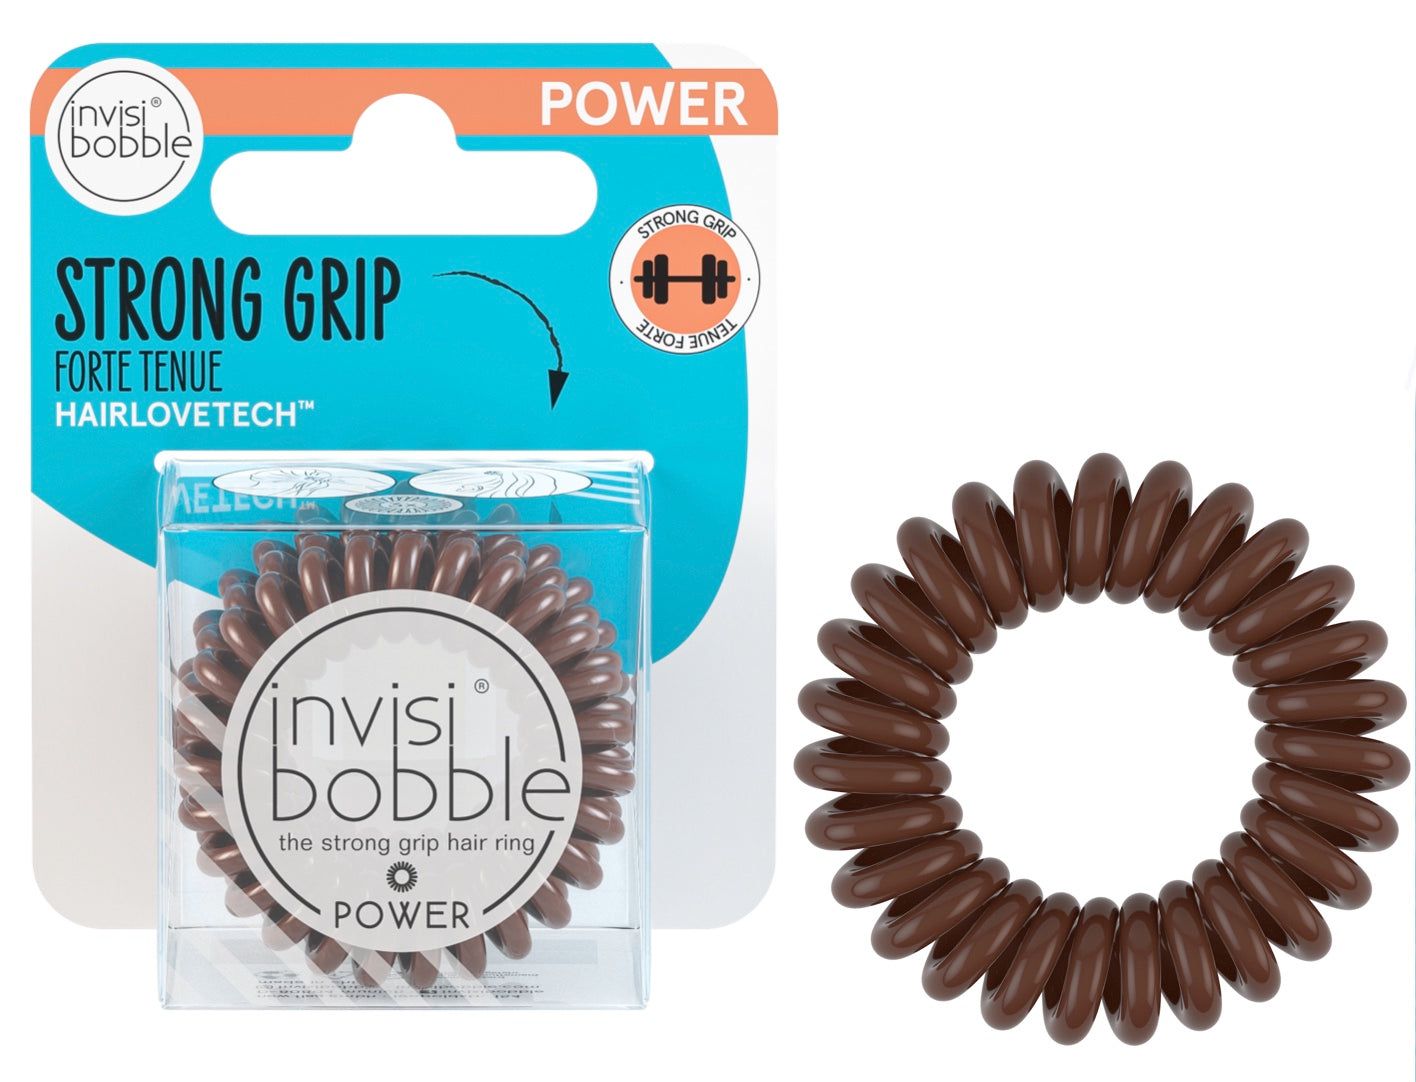 RETAIL INVISIBOBBLE POWER TRACELESS HAIR RING